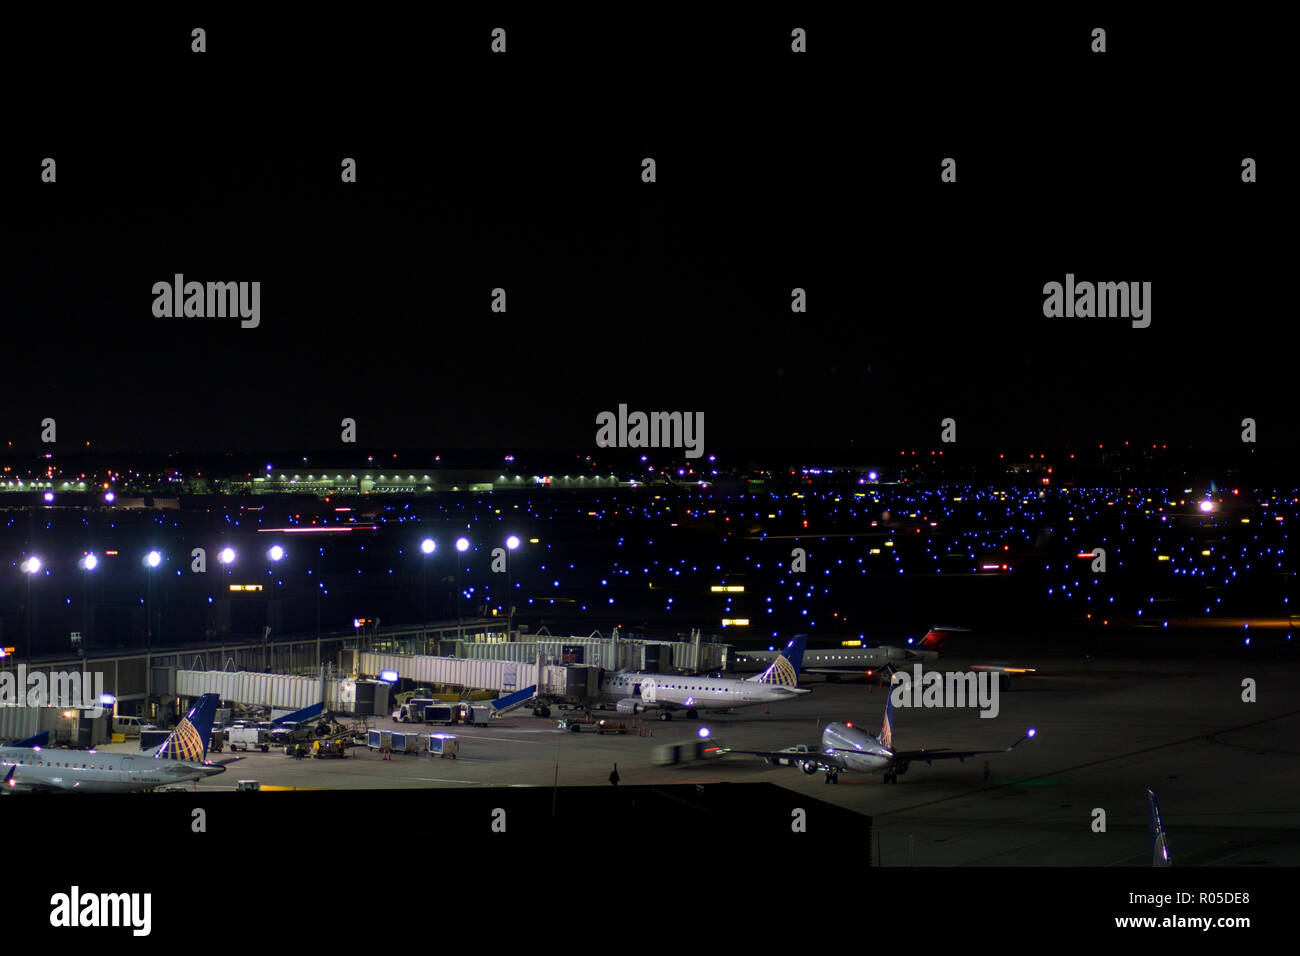 CHICAGO, ILLINOIS, UNITED STATES - MAY 11th, 2018: Several airplanes at the gate at Chicago O'Hare International Airport at night Stock Photo